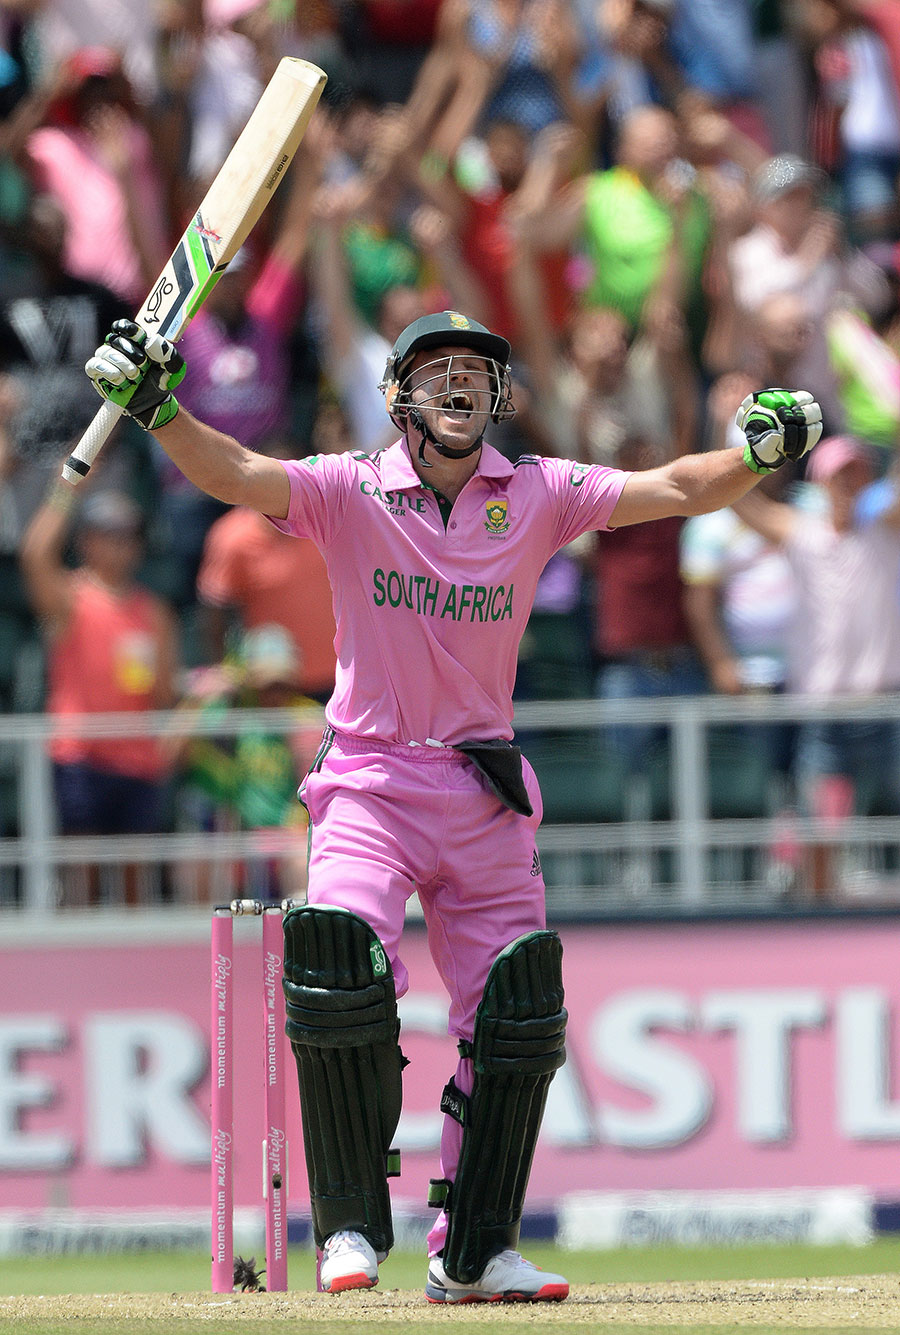 AB de Villiers celebrates his record-breaking century against West Indies in 2nd ODI at Johannesburg on Sunday.